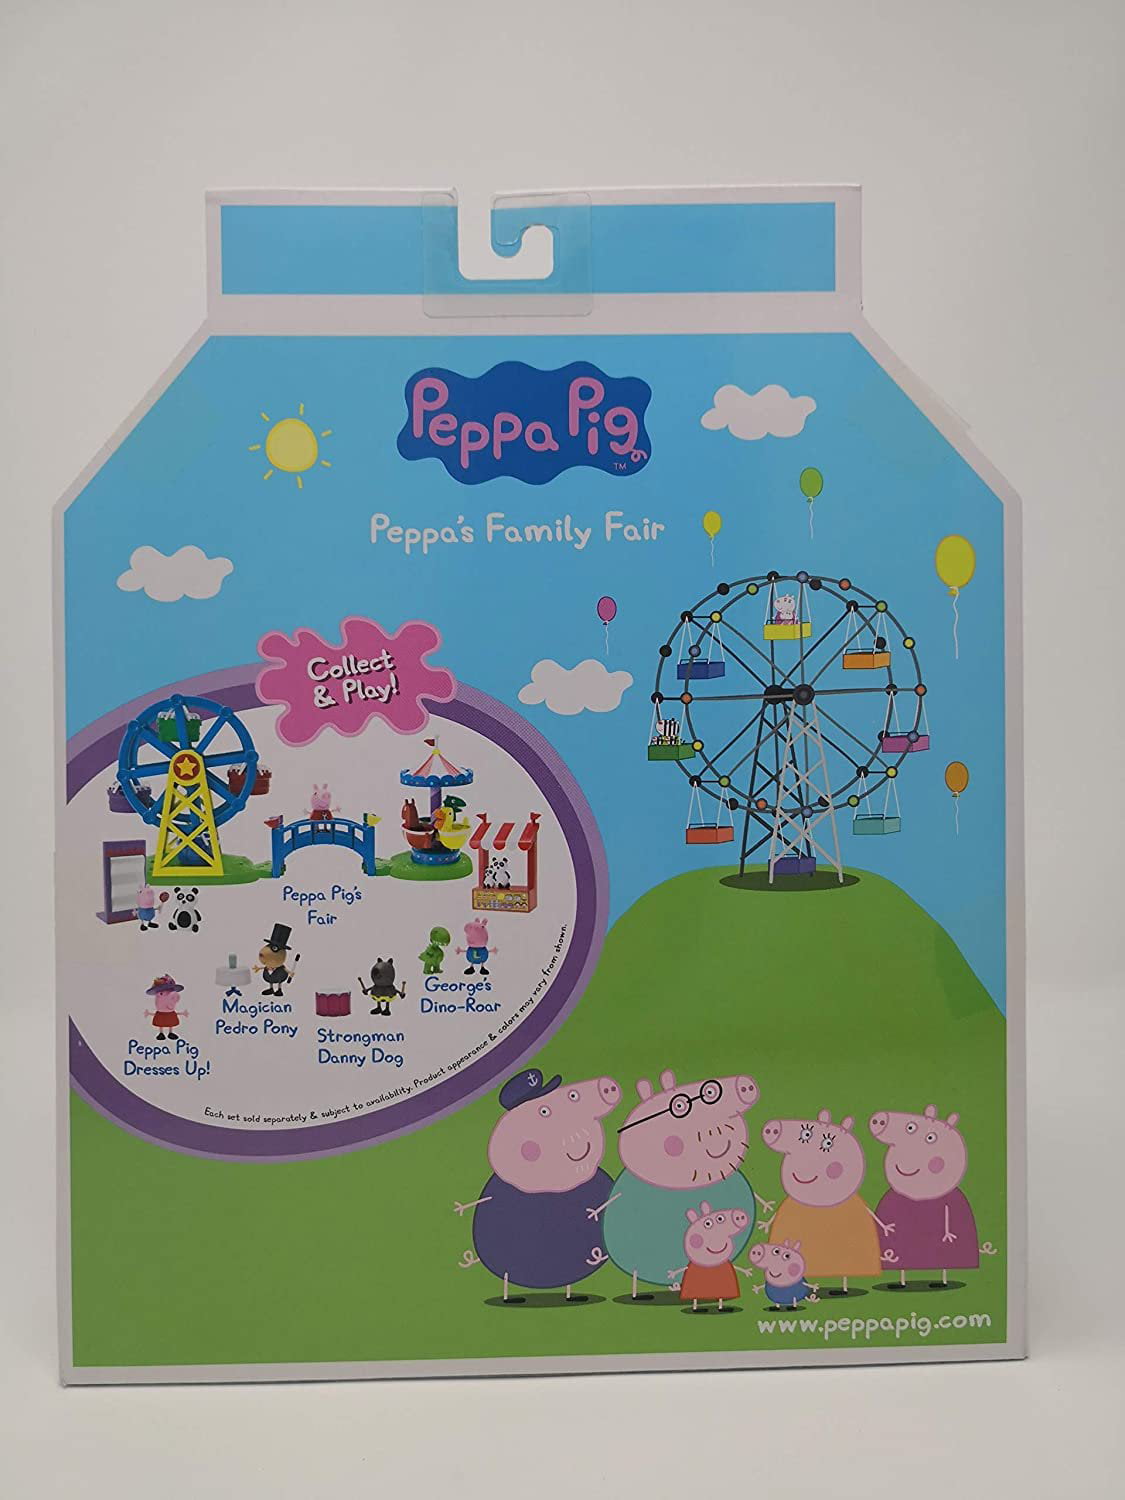 NEW PEPPA PIG PEPPA'S GRANDPARENTS HOUSE TOY SET AGES 3+